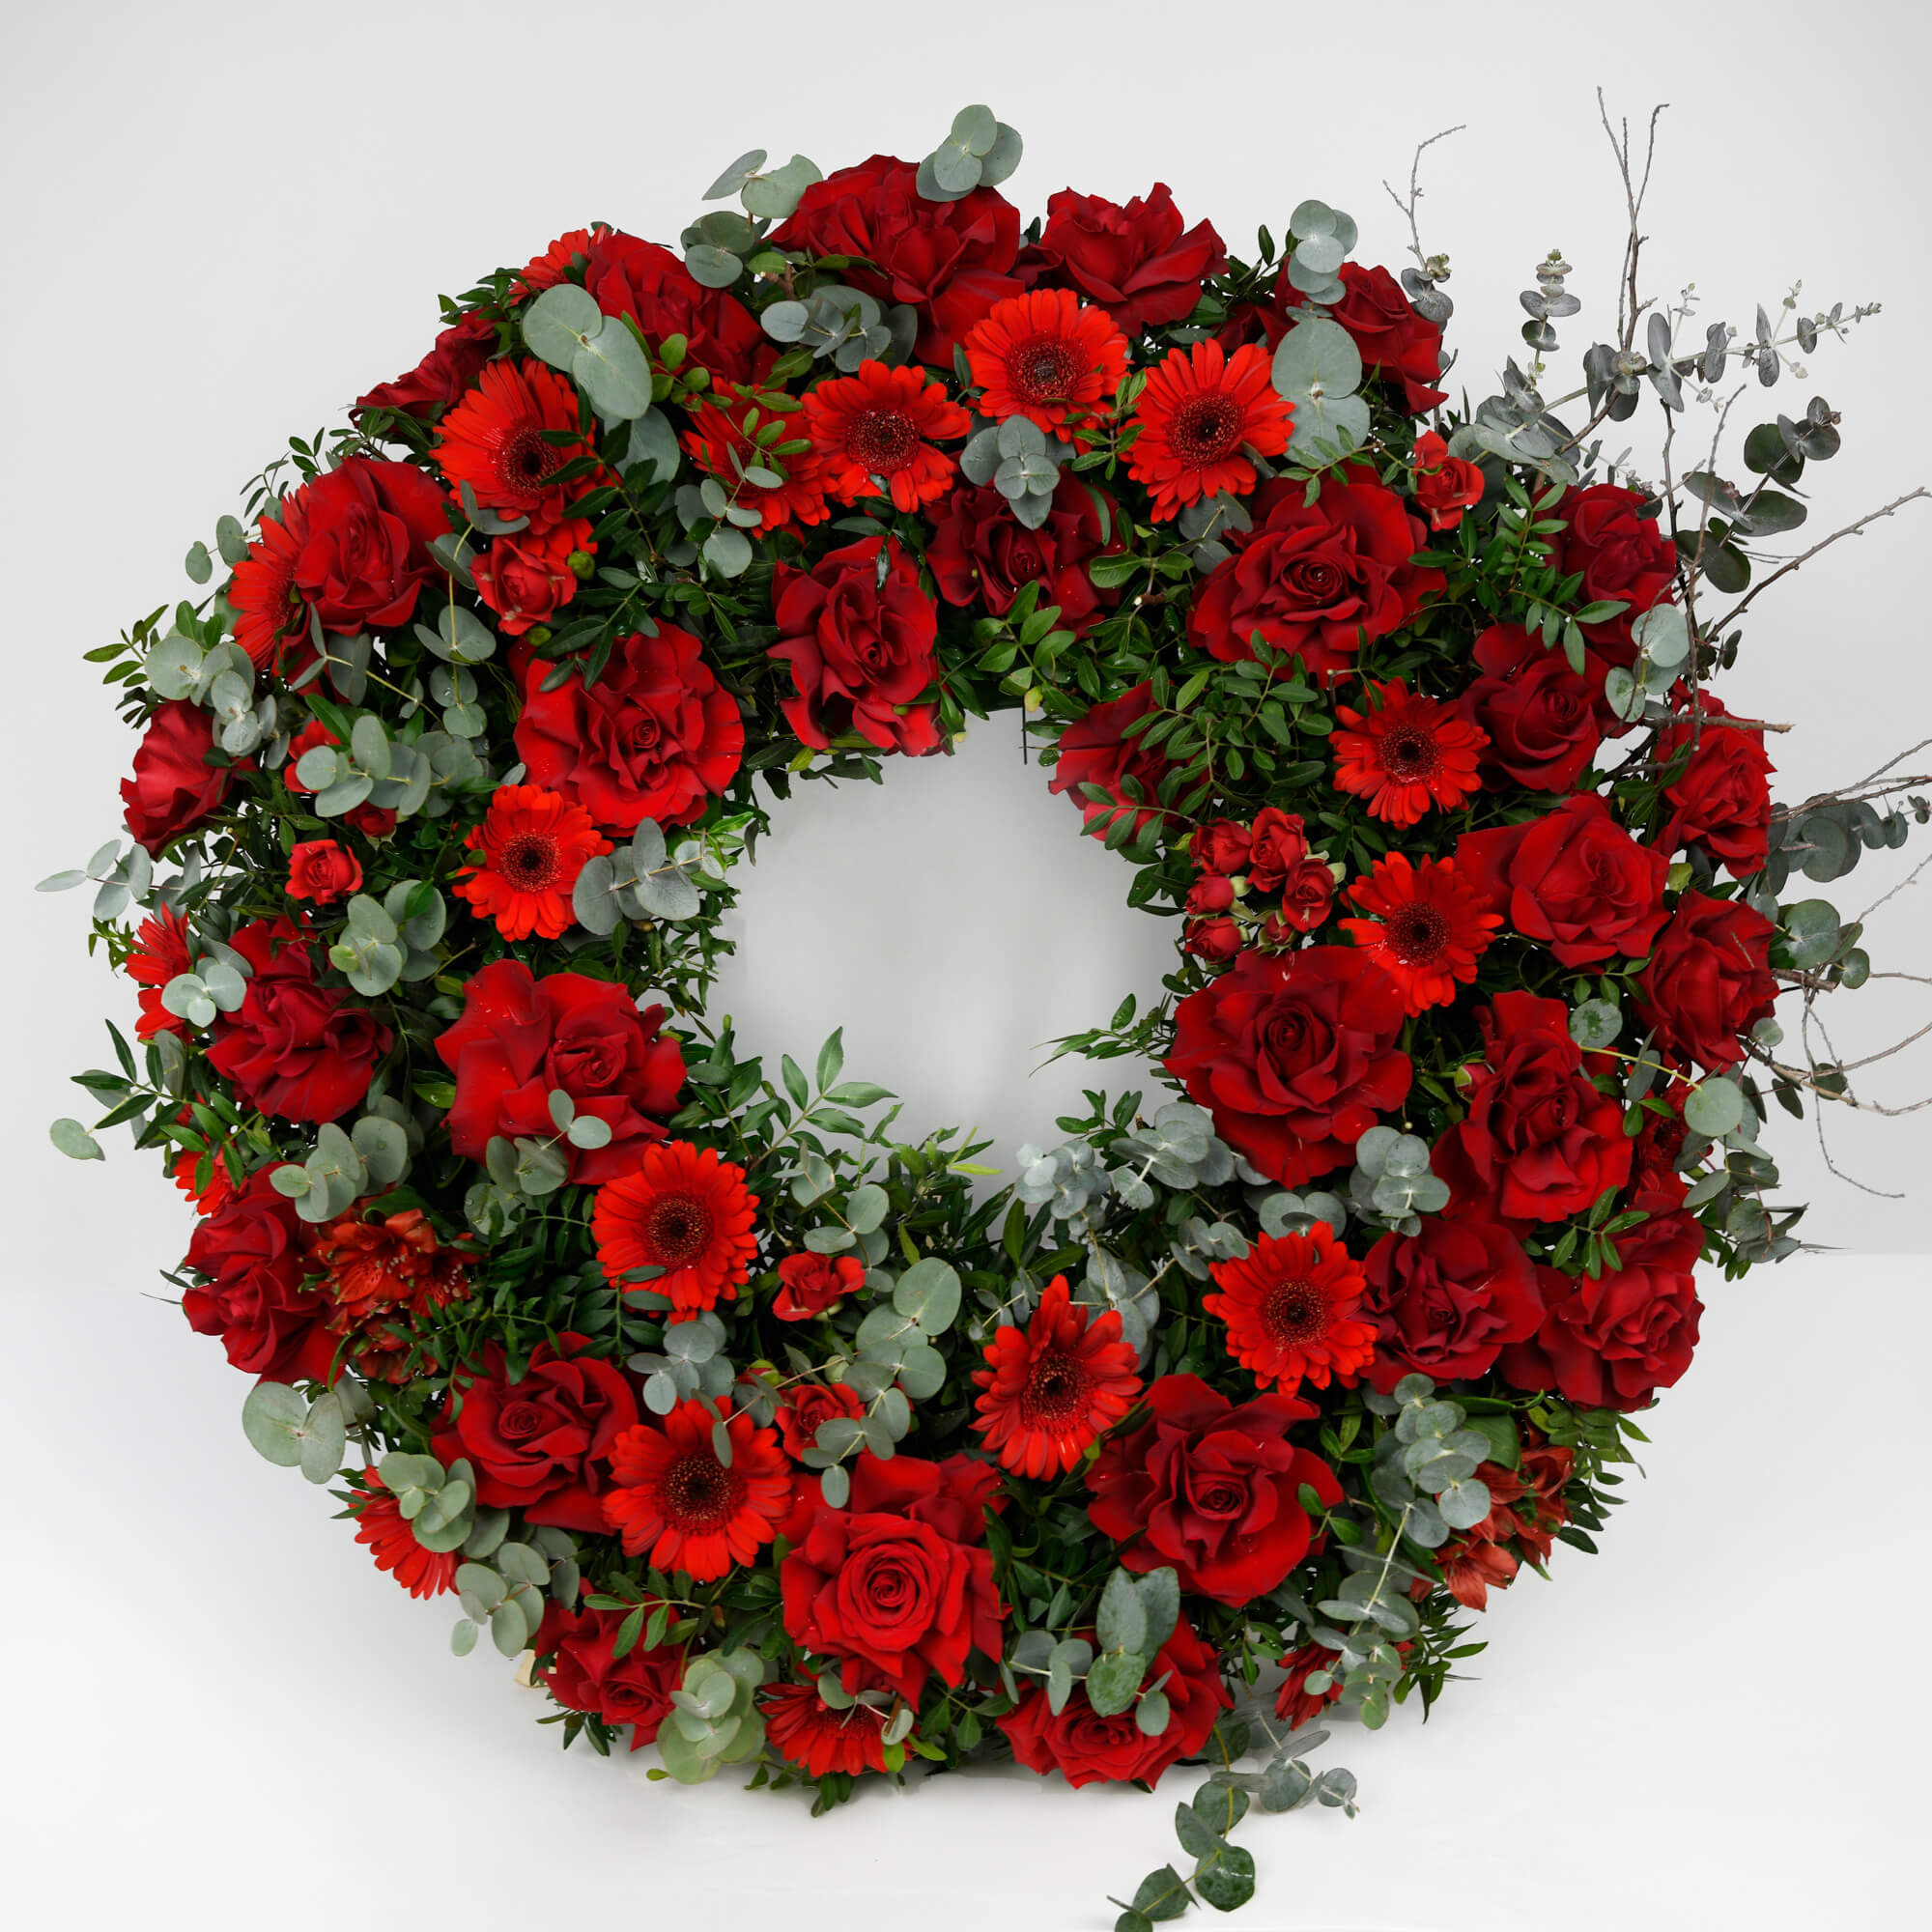 Funeral wreath with red roses and gerbera